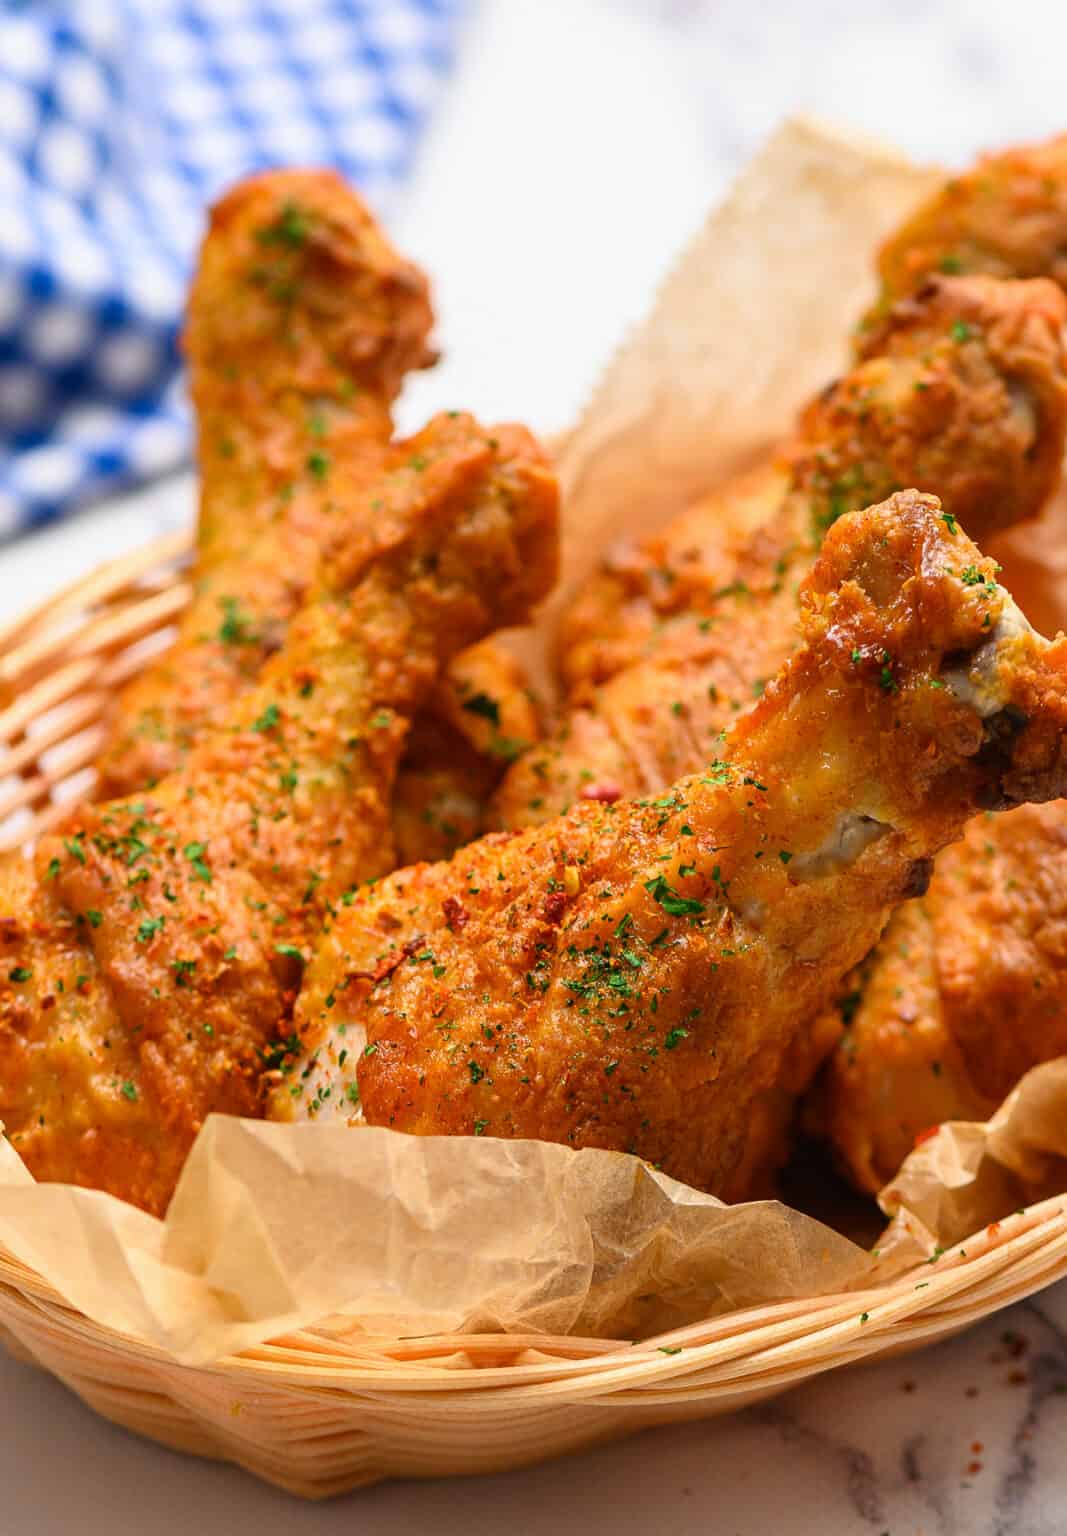 FRIED CHICKEN RECIPE WITH CRISCO